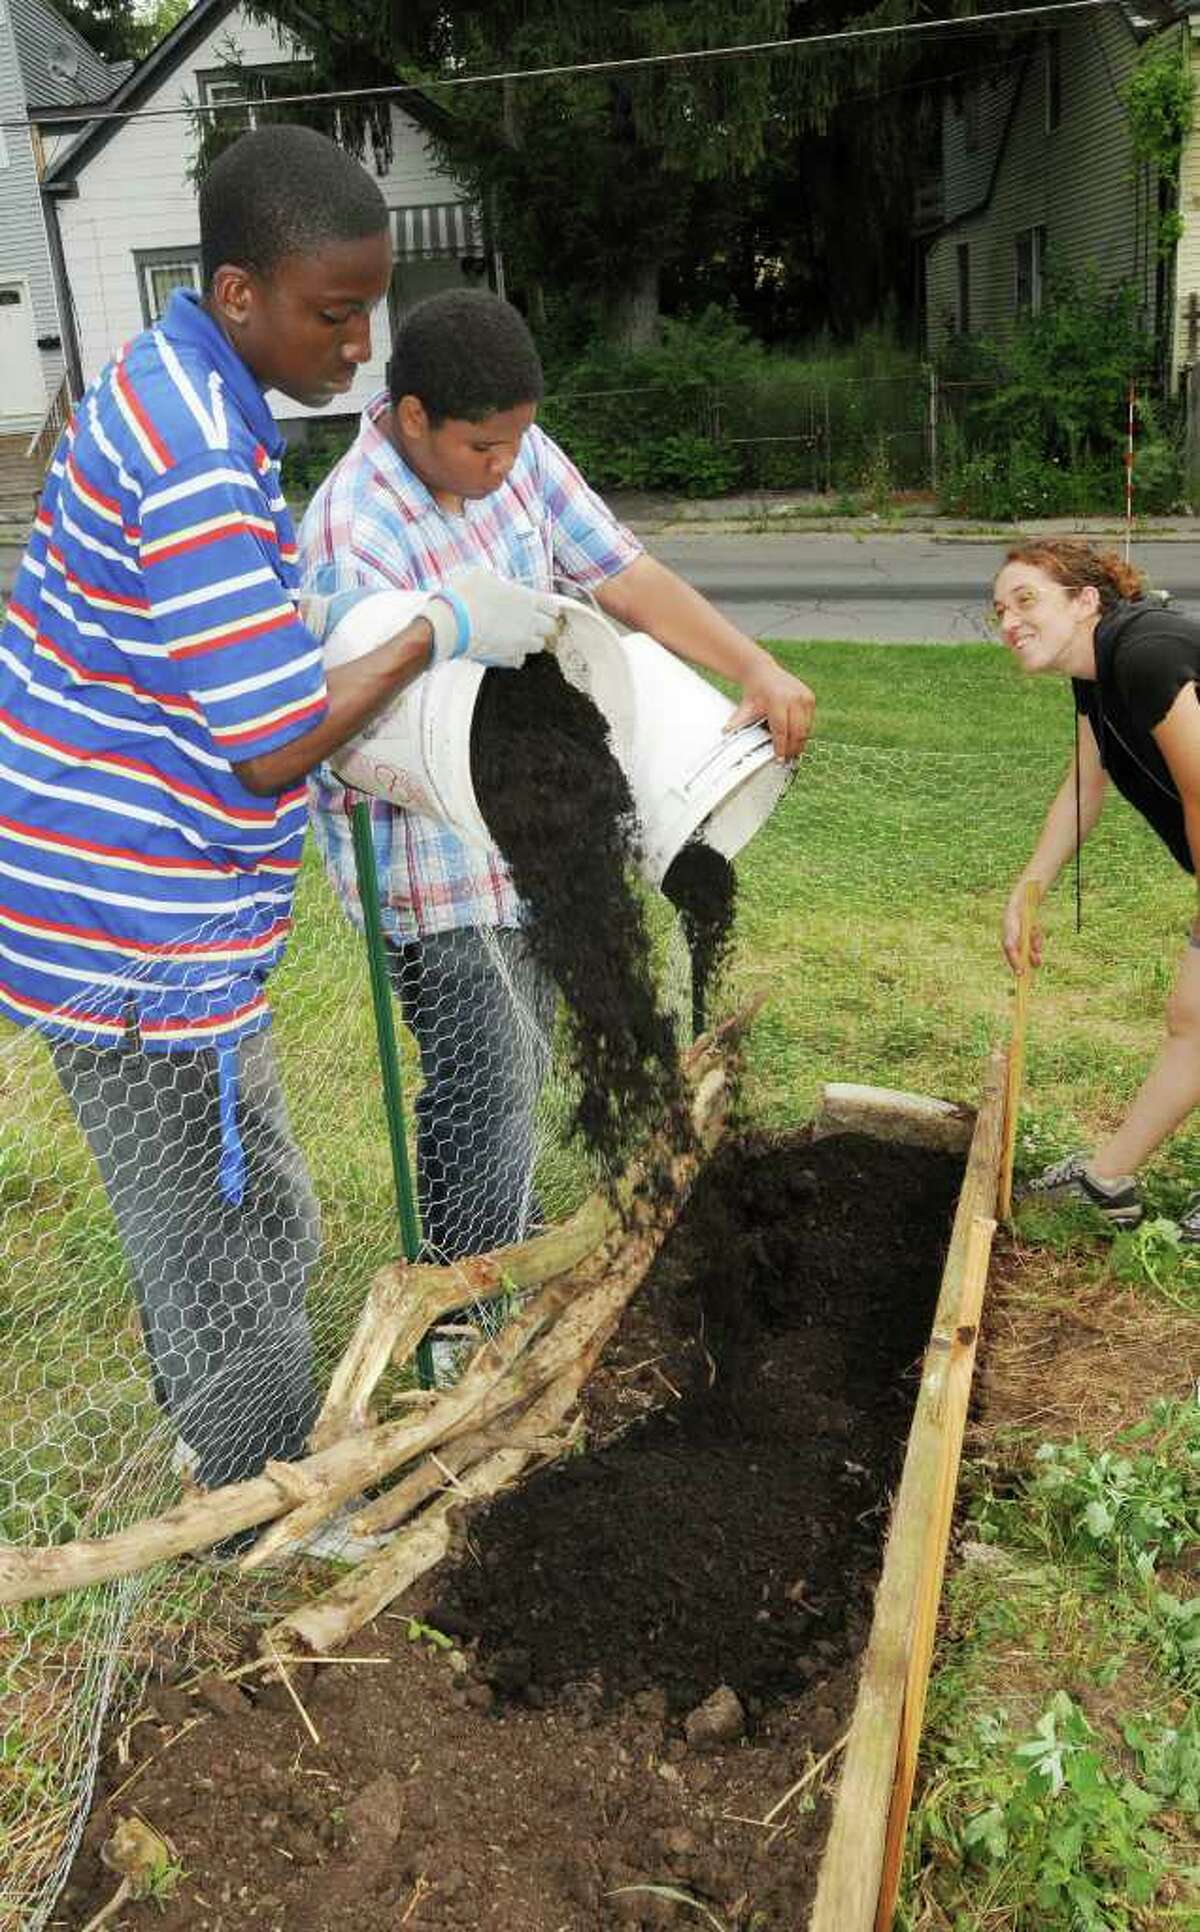 Akil Hamilton, 17, Dedree Clarke, 15, and Rana Morris install a garden box intended to house snap peas. (Luanne M. Ferris / Times Union)